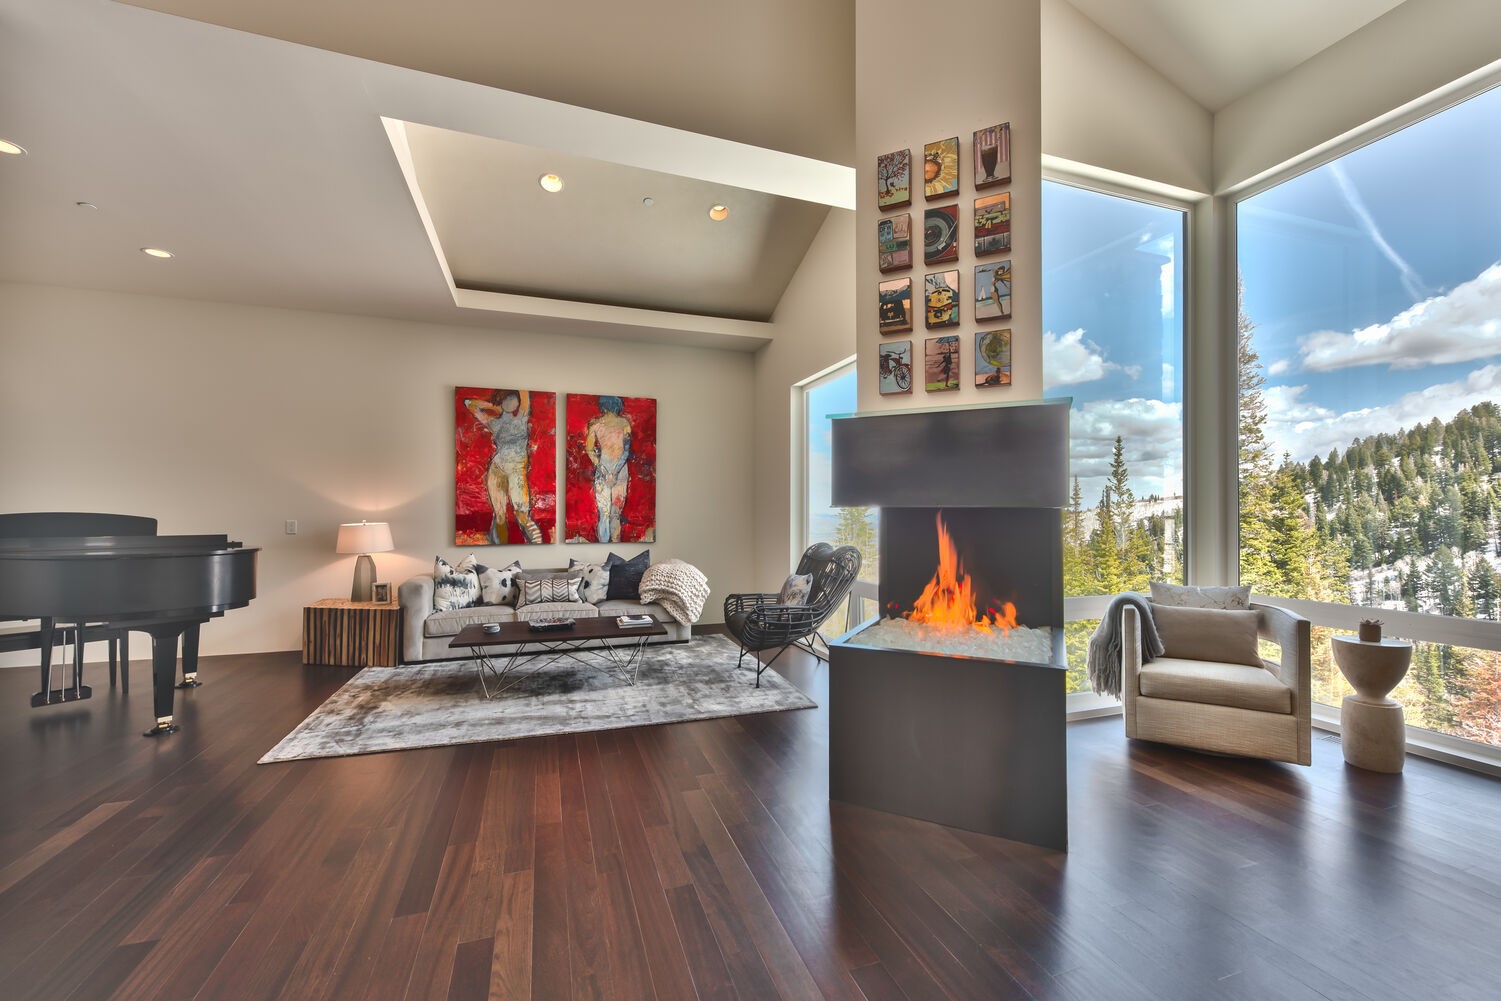 Living Room with Mountain Views and Fireplace in Our Deer Valley Lodging Rentals.